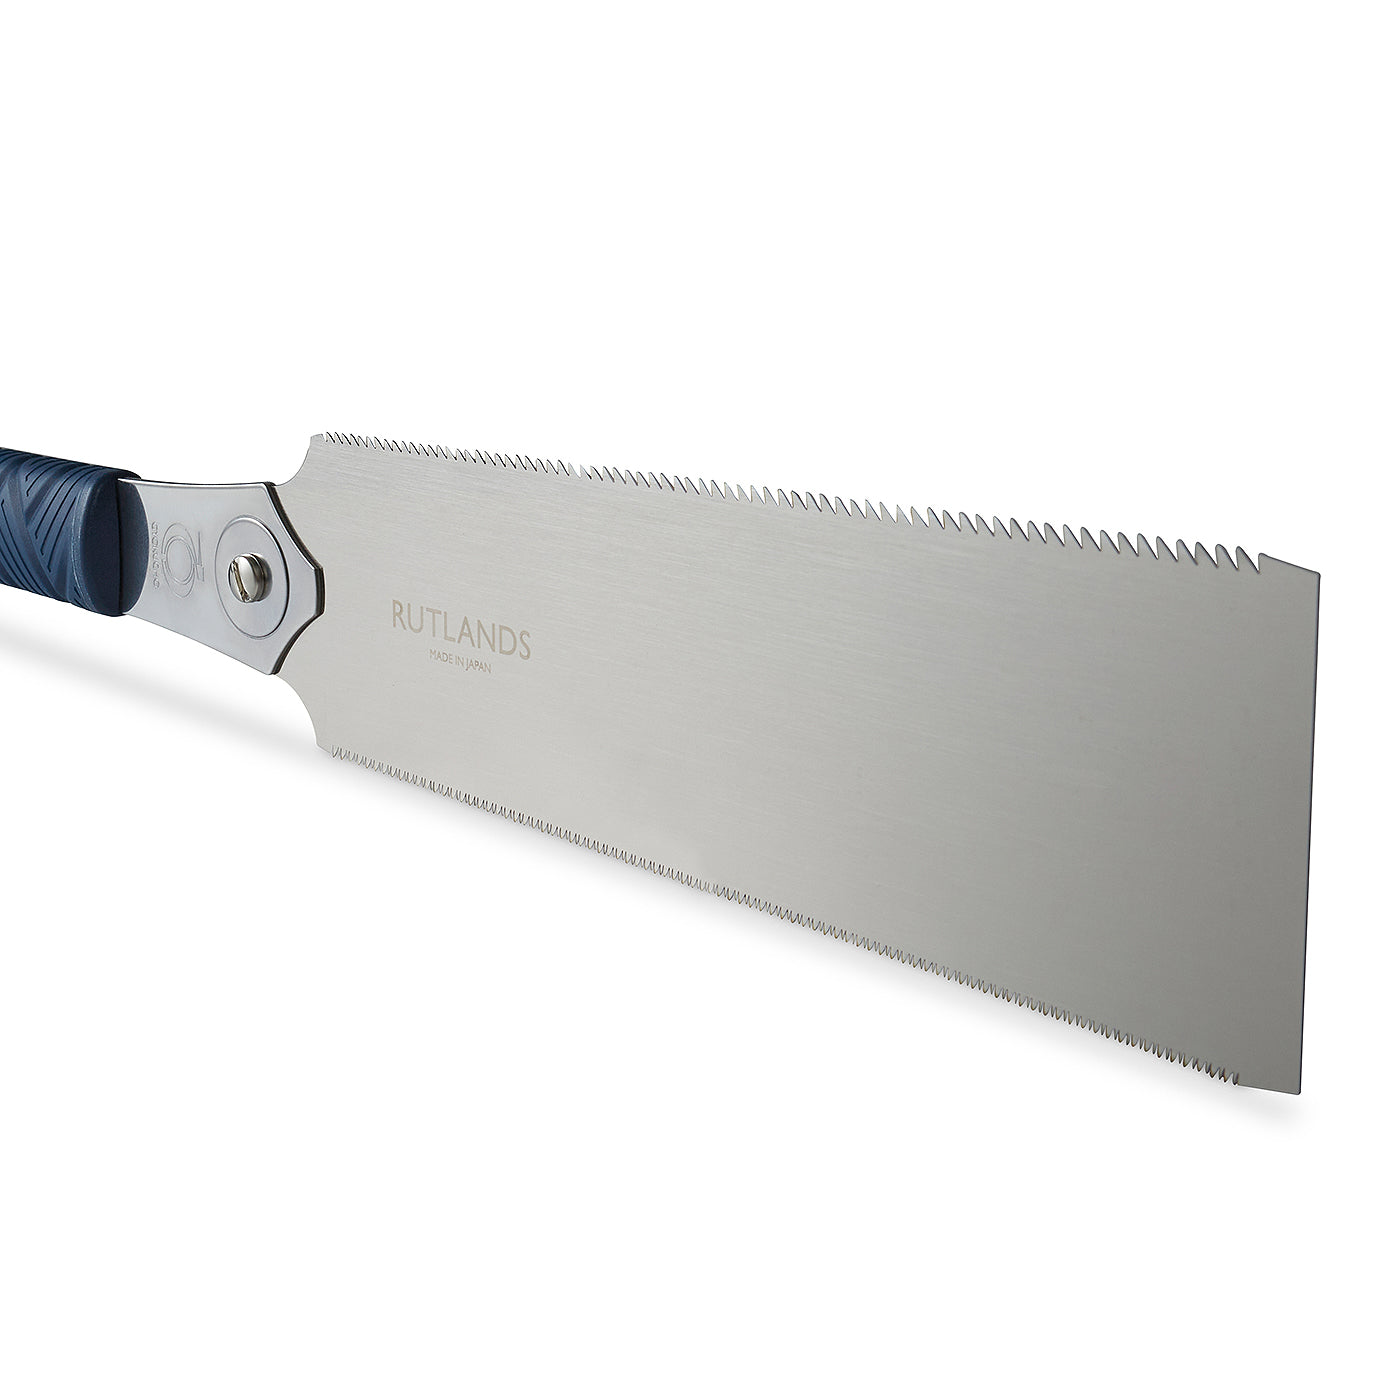 | Ryoba Saws – Limited Day Next Japanese Delivery Rutlands